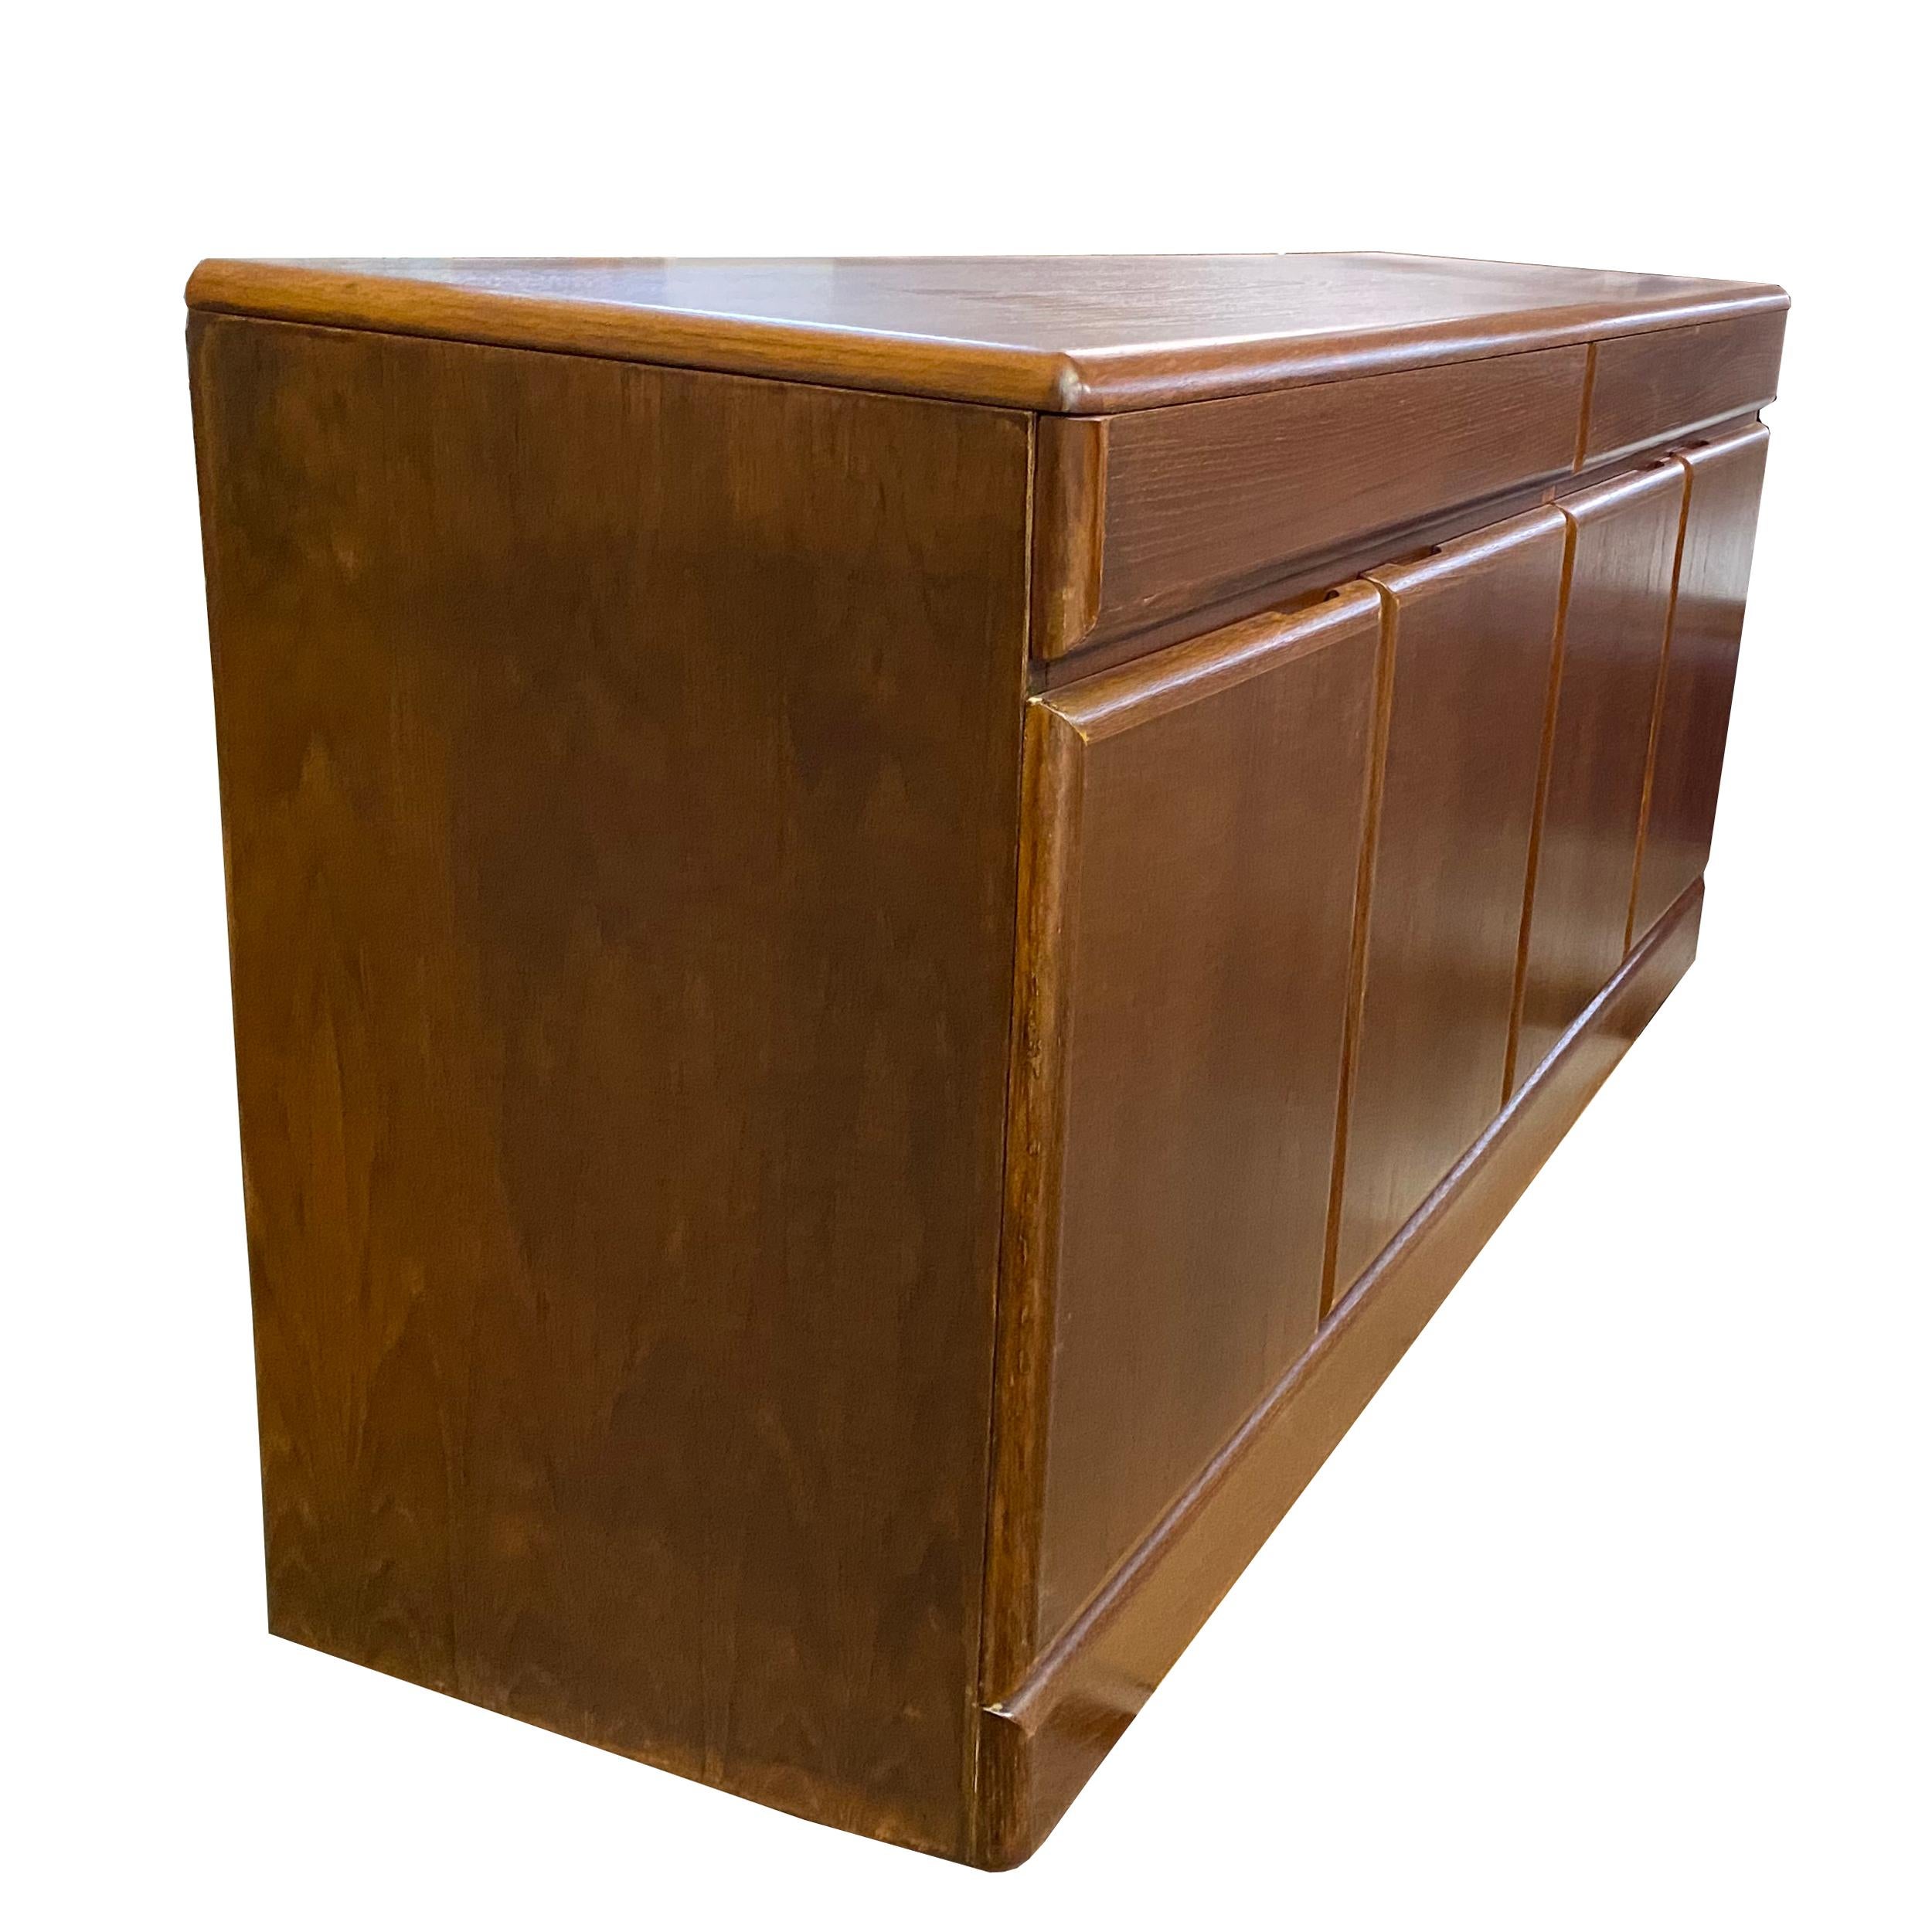 Vintage mid century teak Credenza
Ample storage for dining and silverware with 2 top drawers and storage below.